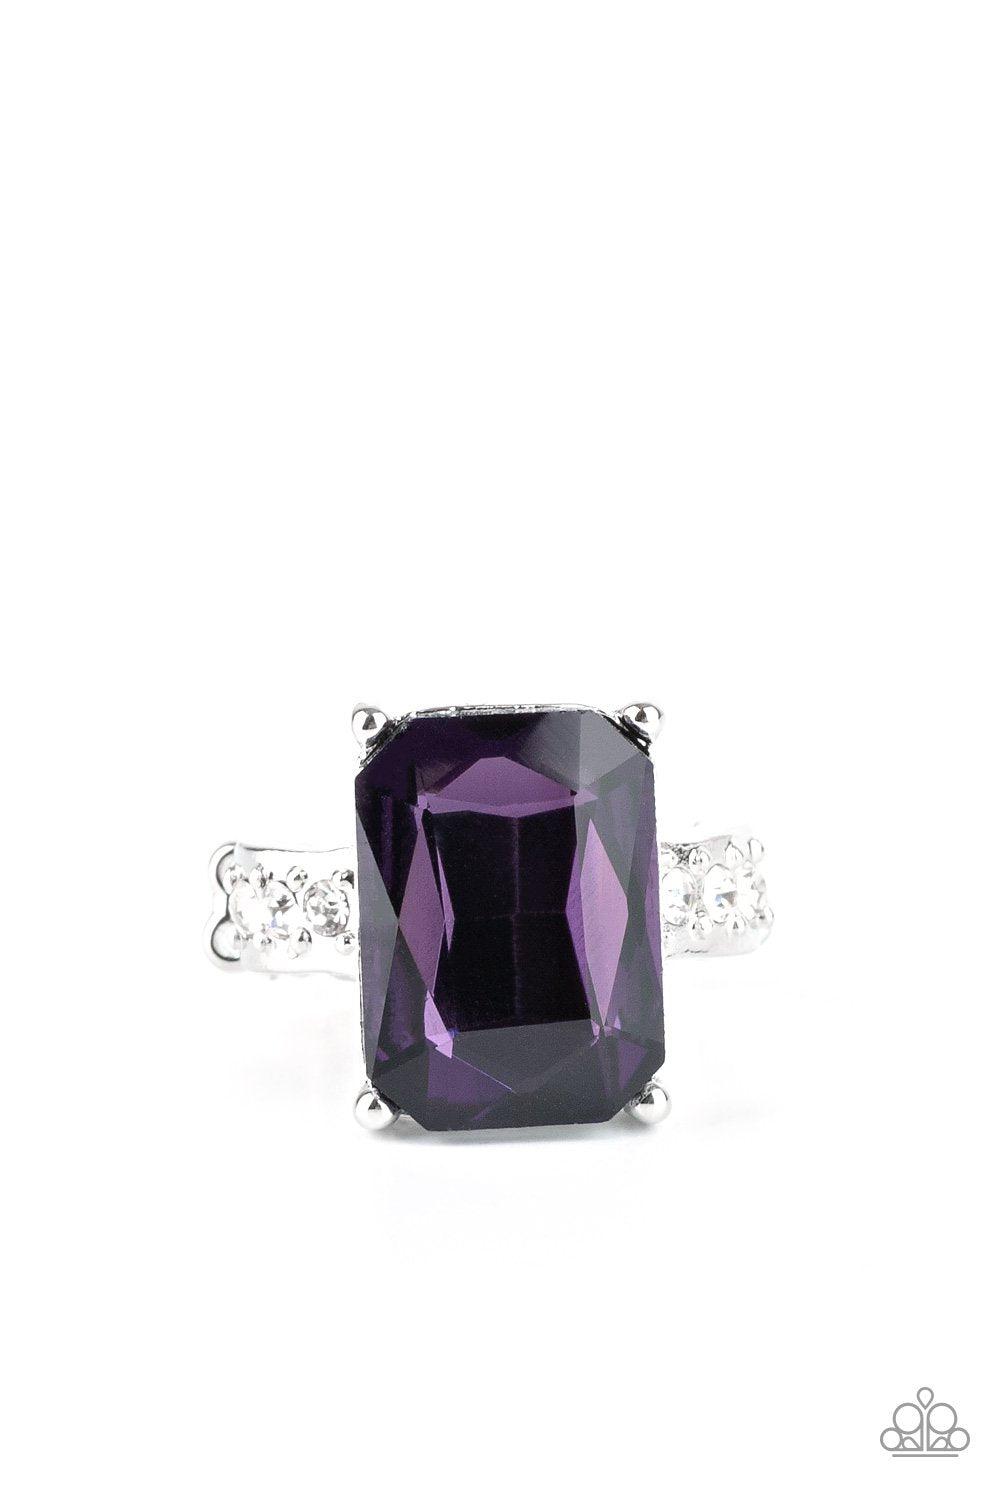 Bring Down the POWERHOUSE Purple Ring - Paparazzi Accessories - lightbox -CarasShop.com - $5 Jewelry by Cara Jewels